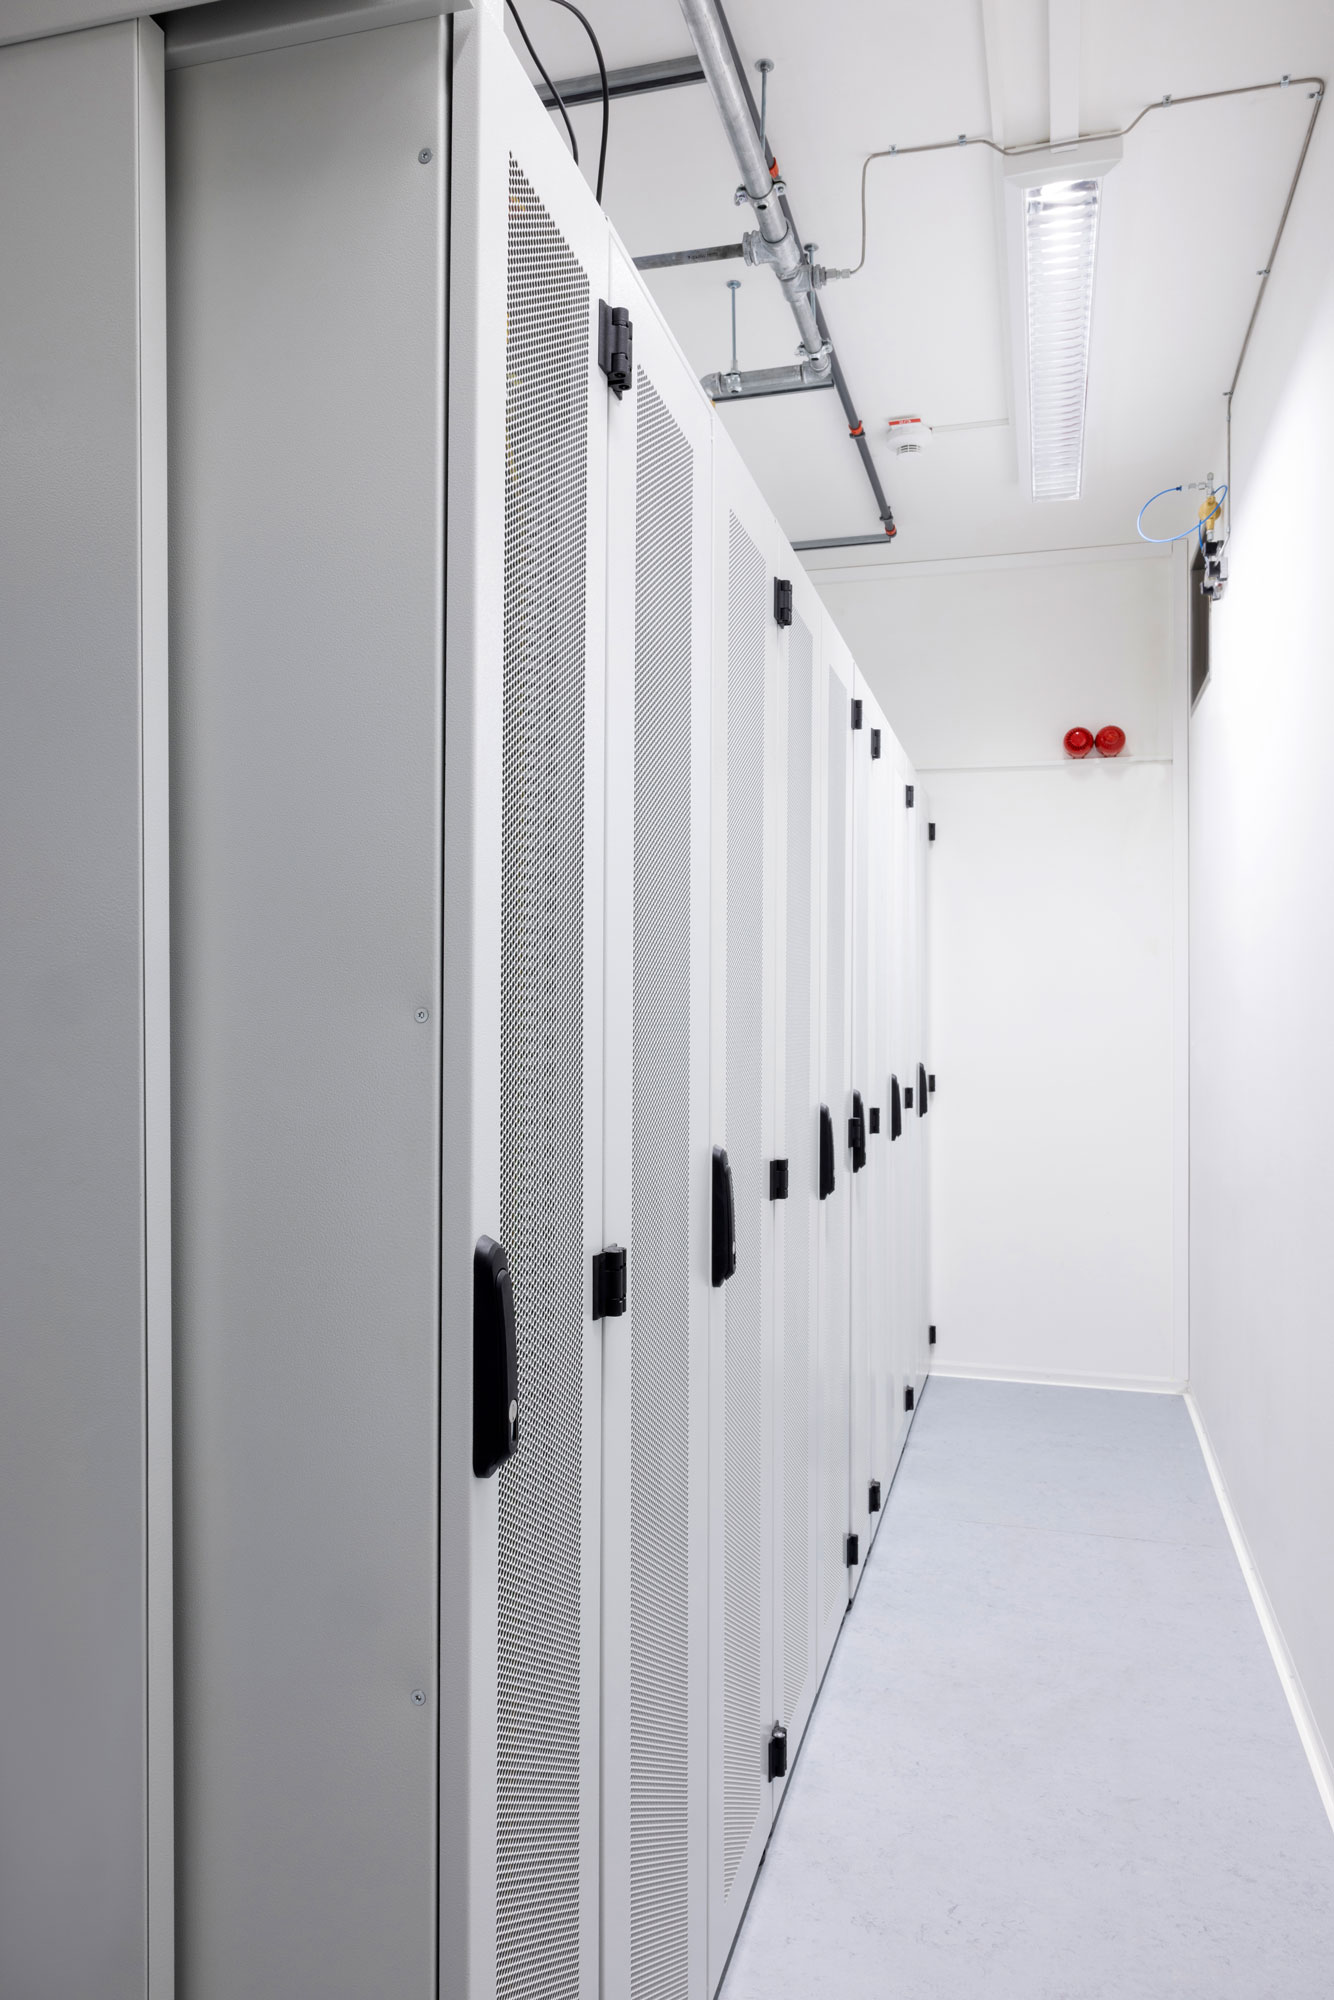 server aisle and server cabinets